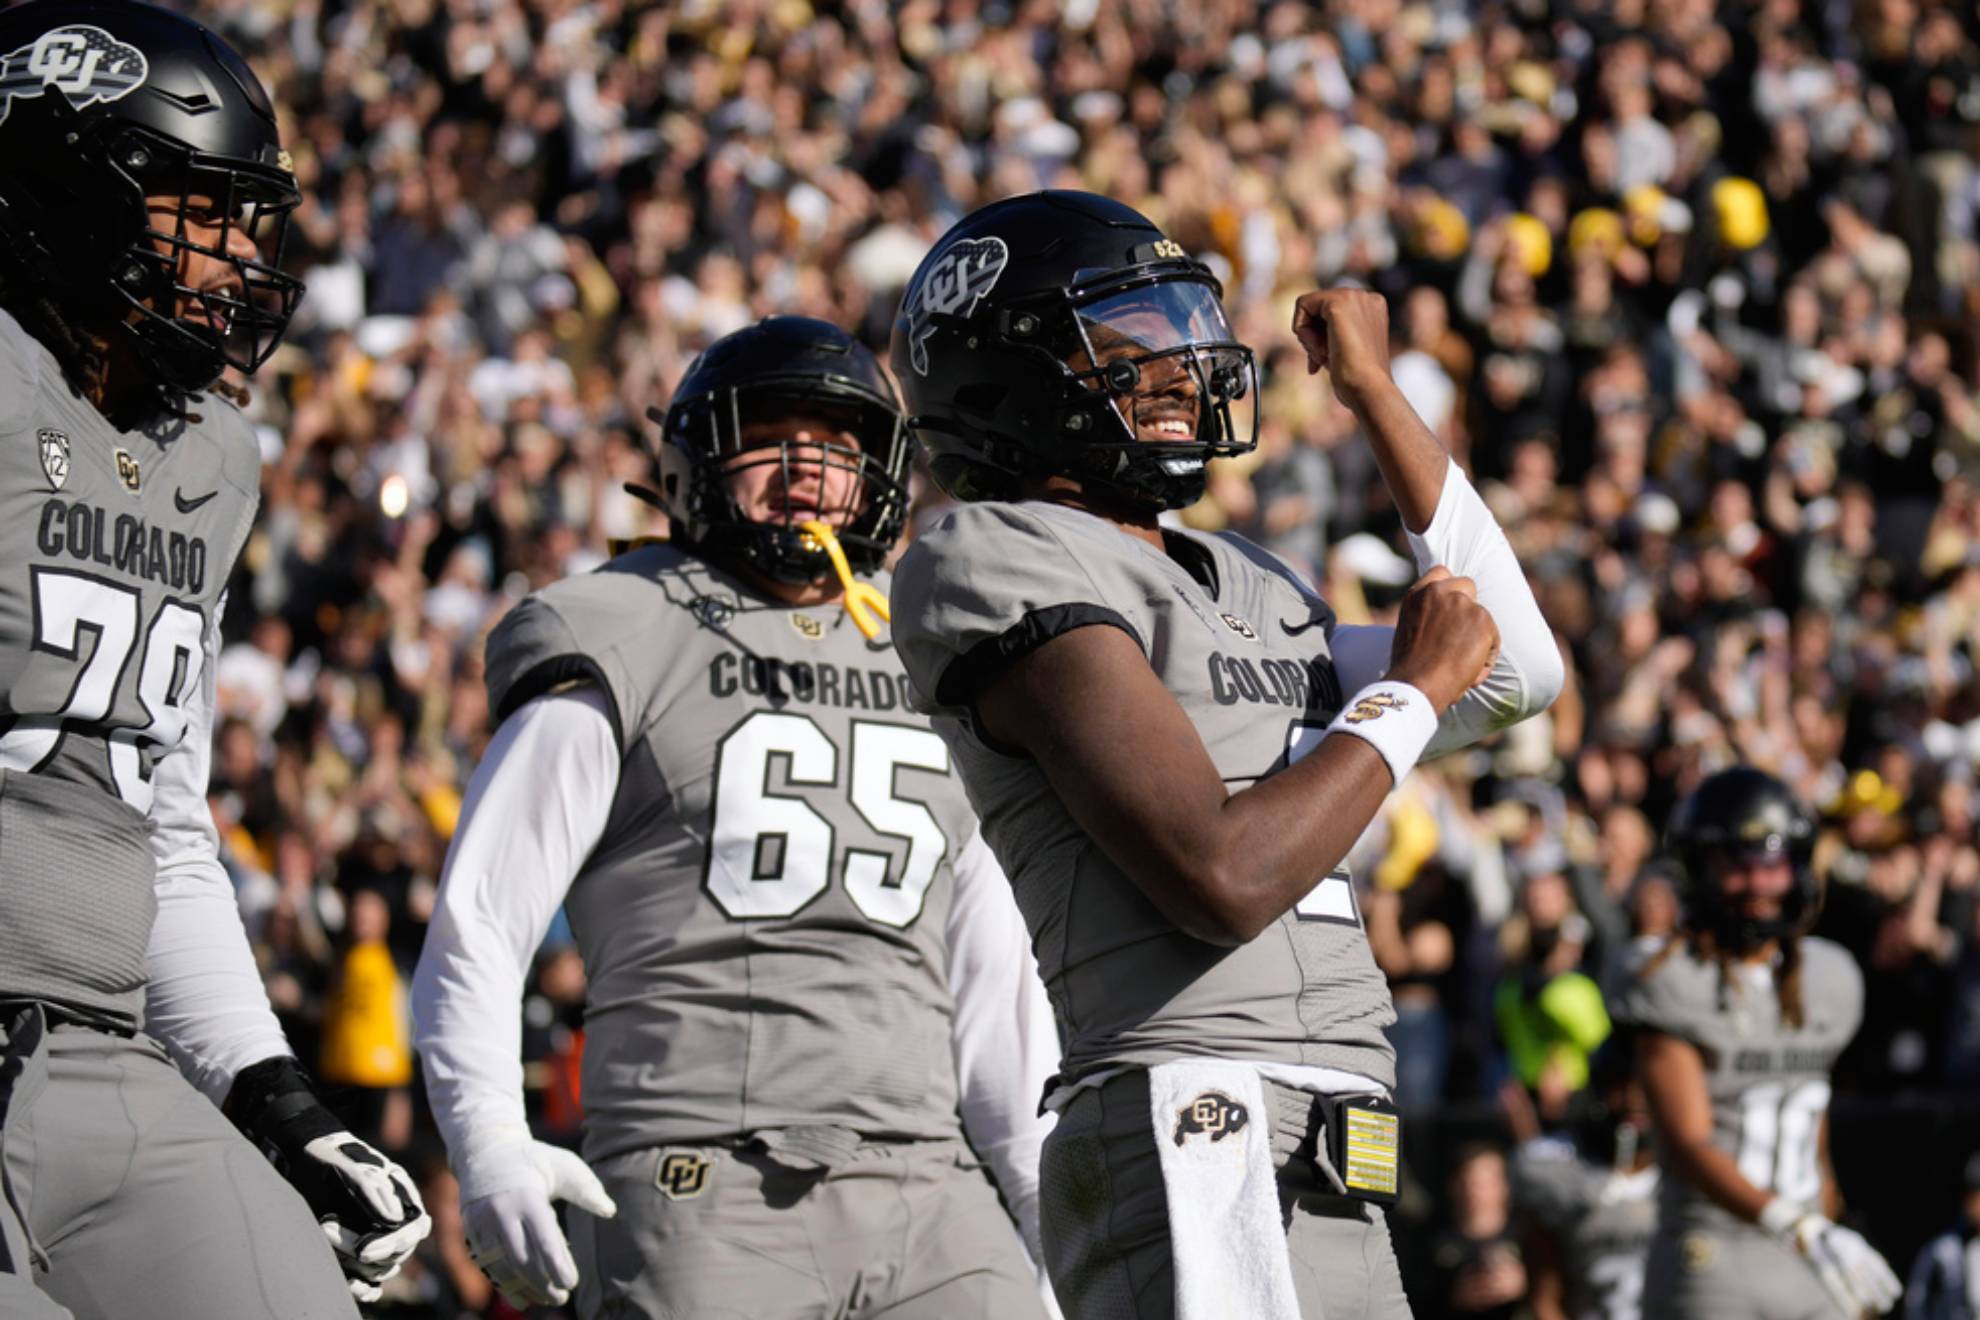 Colorado quarterback Shedeur Sanders, right, gestures to the crowd after scoring a touchdown